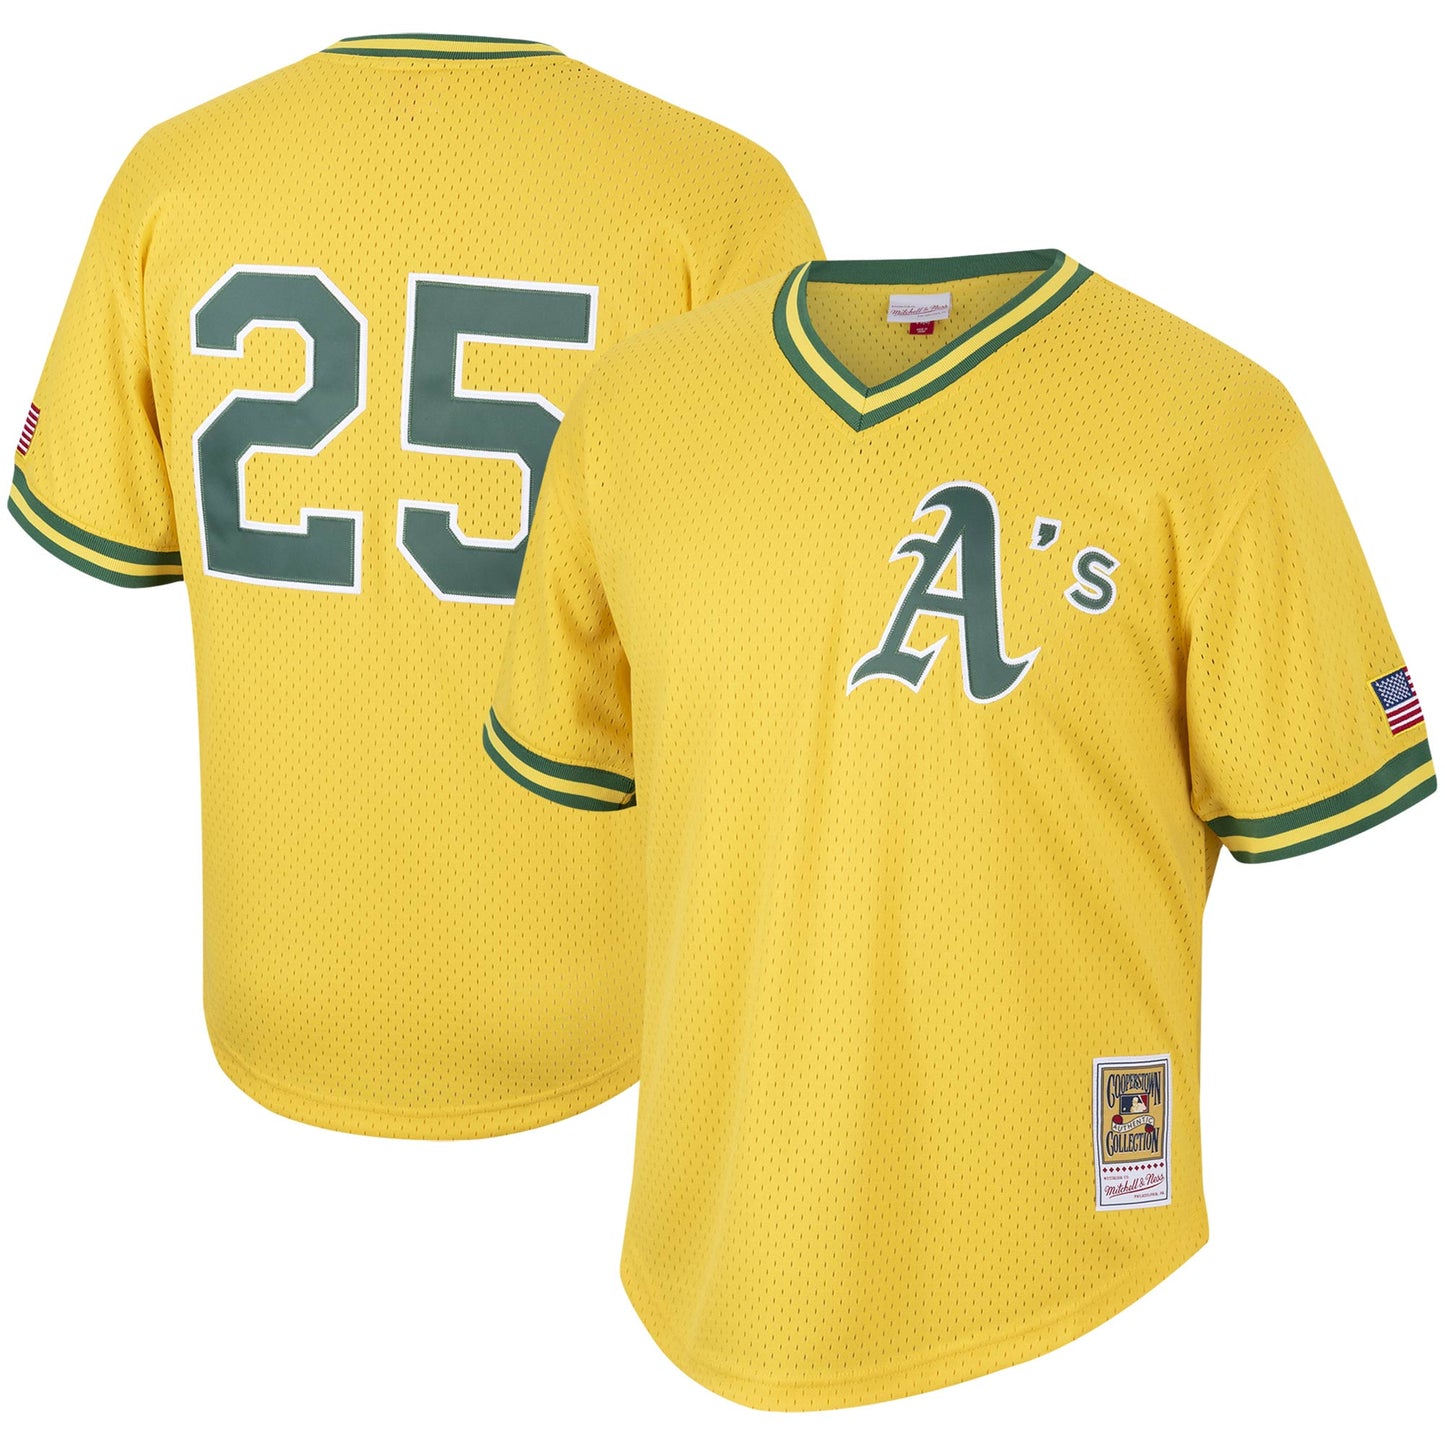 Mark McGwire Oakland Athletics Mitchell & Ness Cooperstown Collection Mesh Batting Practice Jersey - Gold